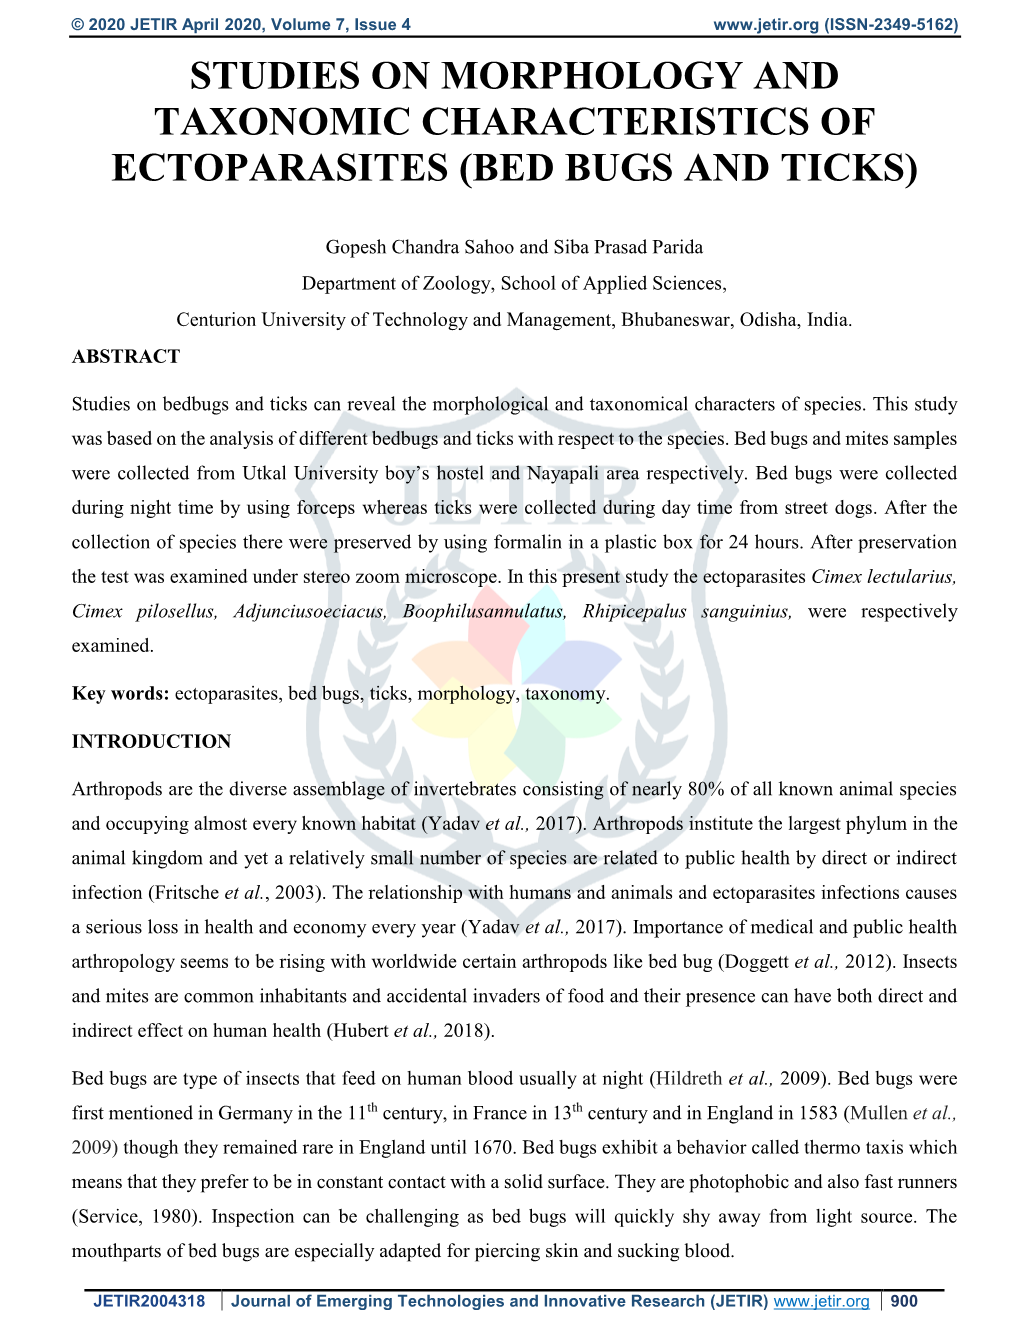 Studies on Morphology and Taxonomic Characteristics of Ectoparasites (Bed Bugs and Ticks)